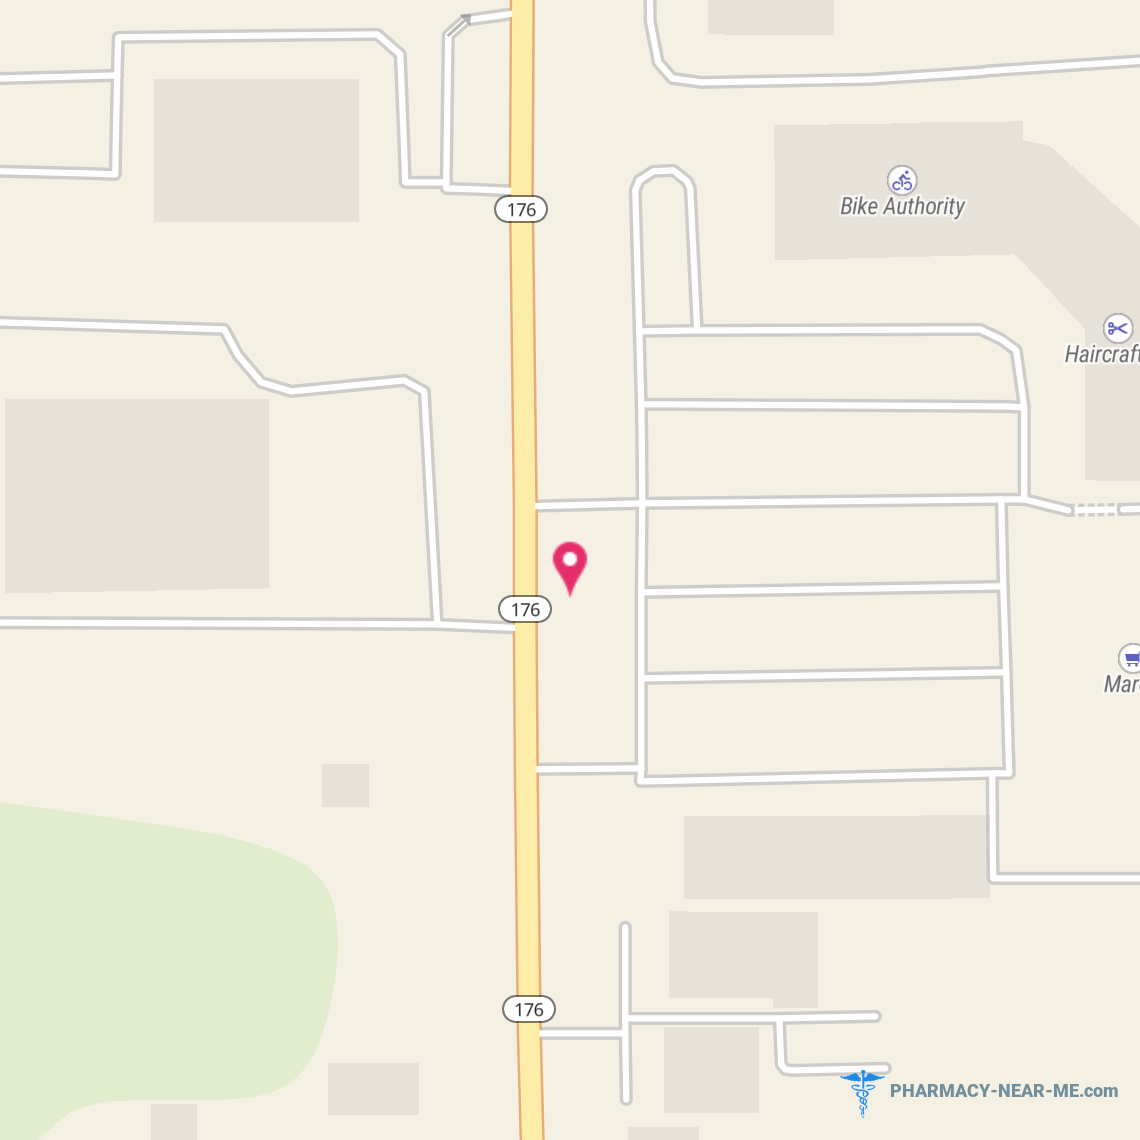 MARCS - Pharmacy Hours, Phone, Reviews & Information: 8003 Broadview Road, Broadview Heights, Ohio 44147, United States